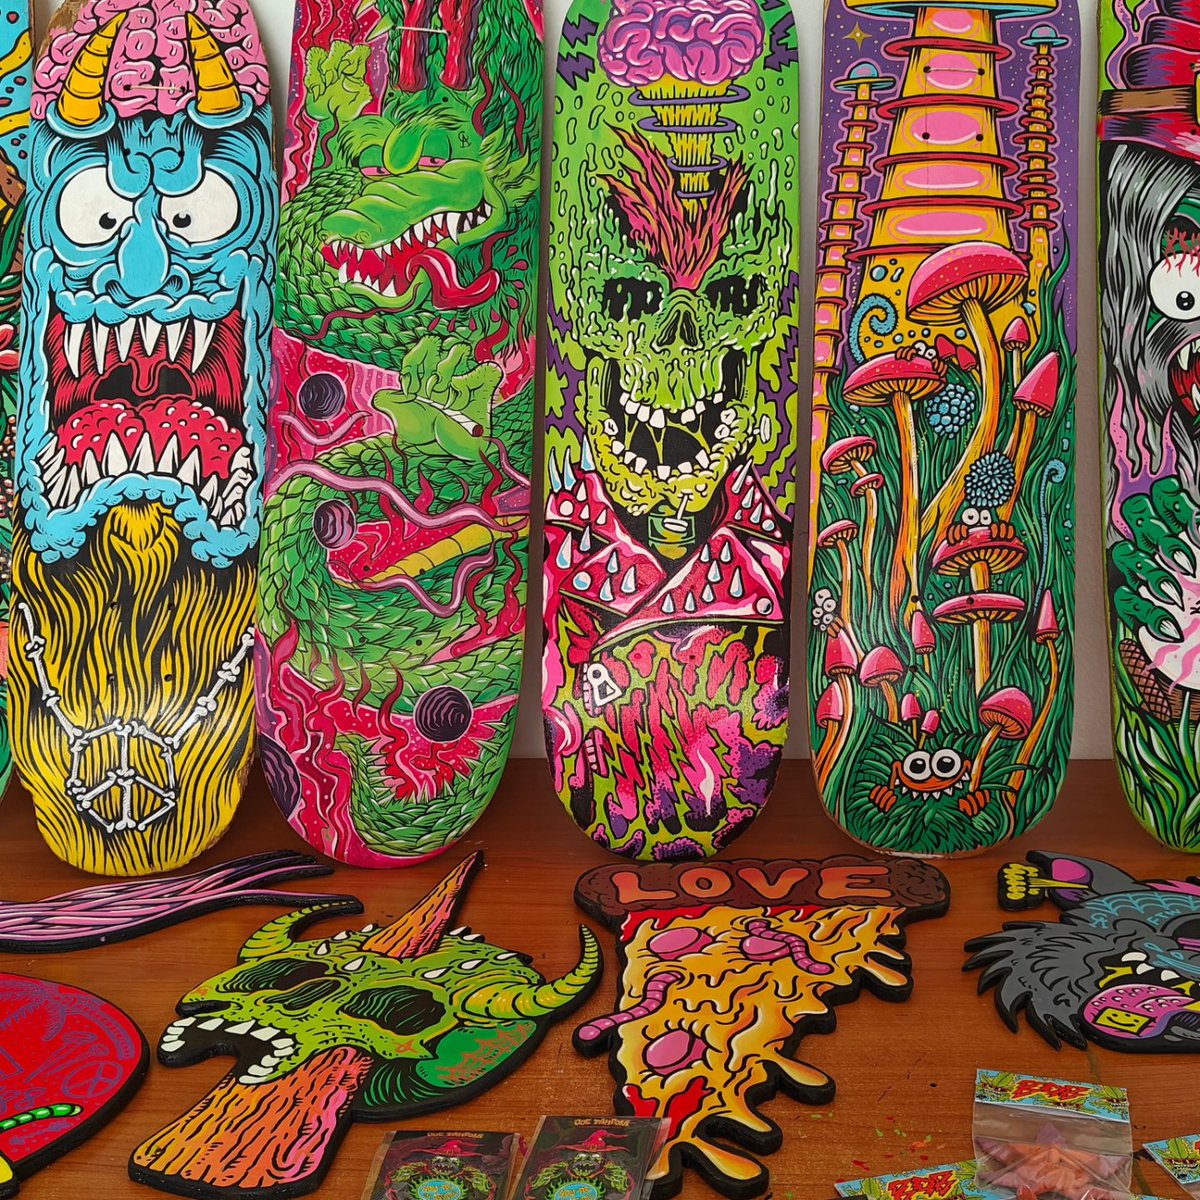 Gm folks! Finally, after months working on it, my online shop is out 🔗⬇️ Collectible toys, hand-painted skateboard decks, woodcuts and lapel pins. 🧵below to see some details!